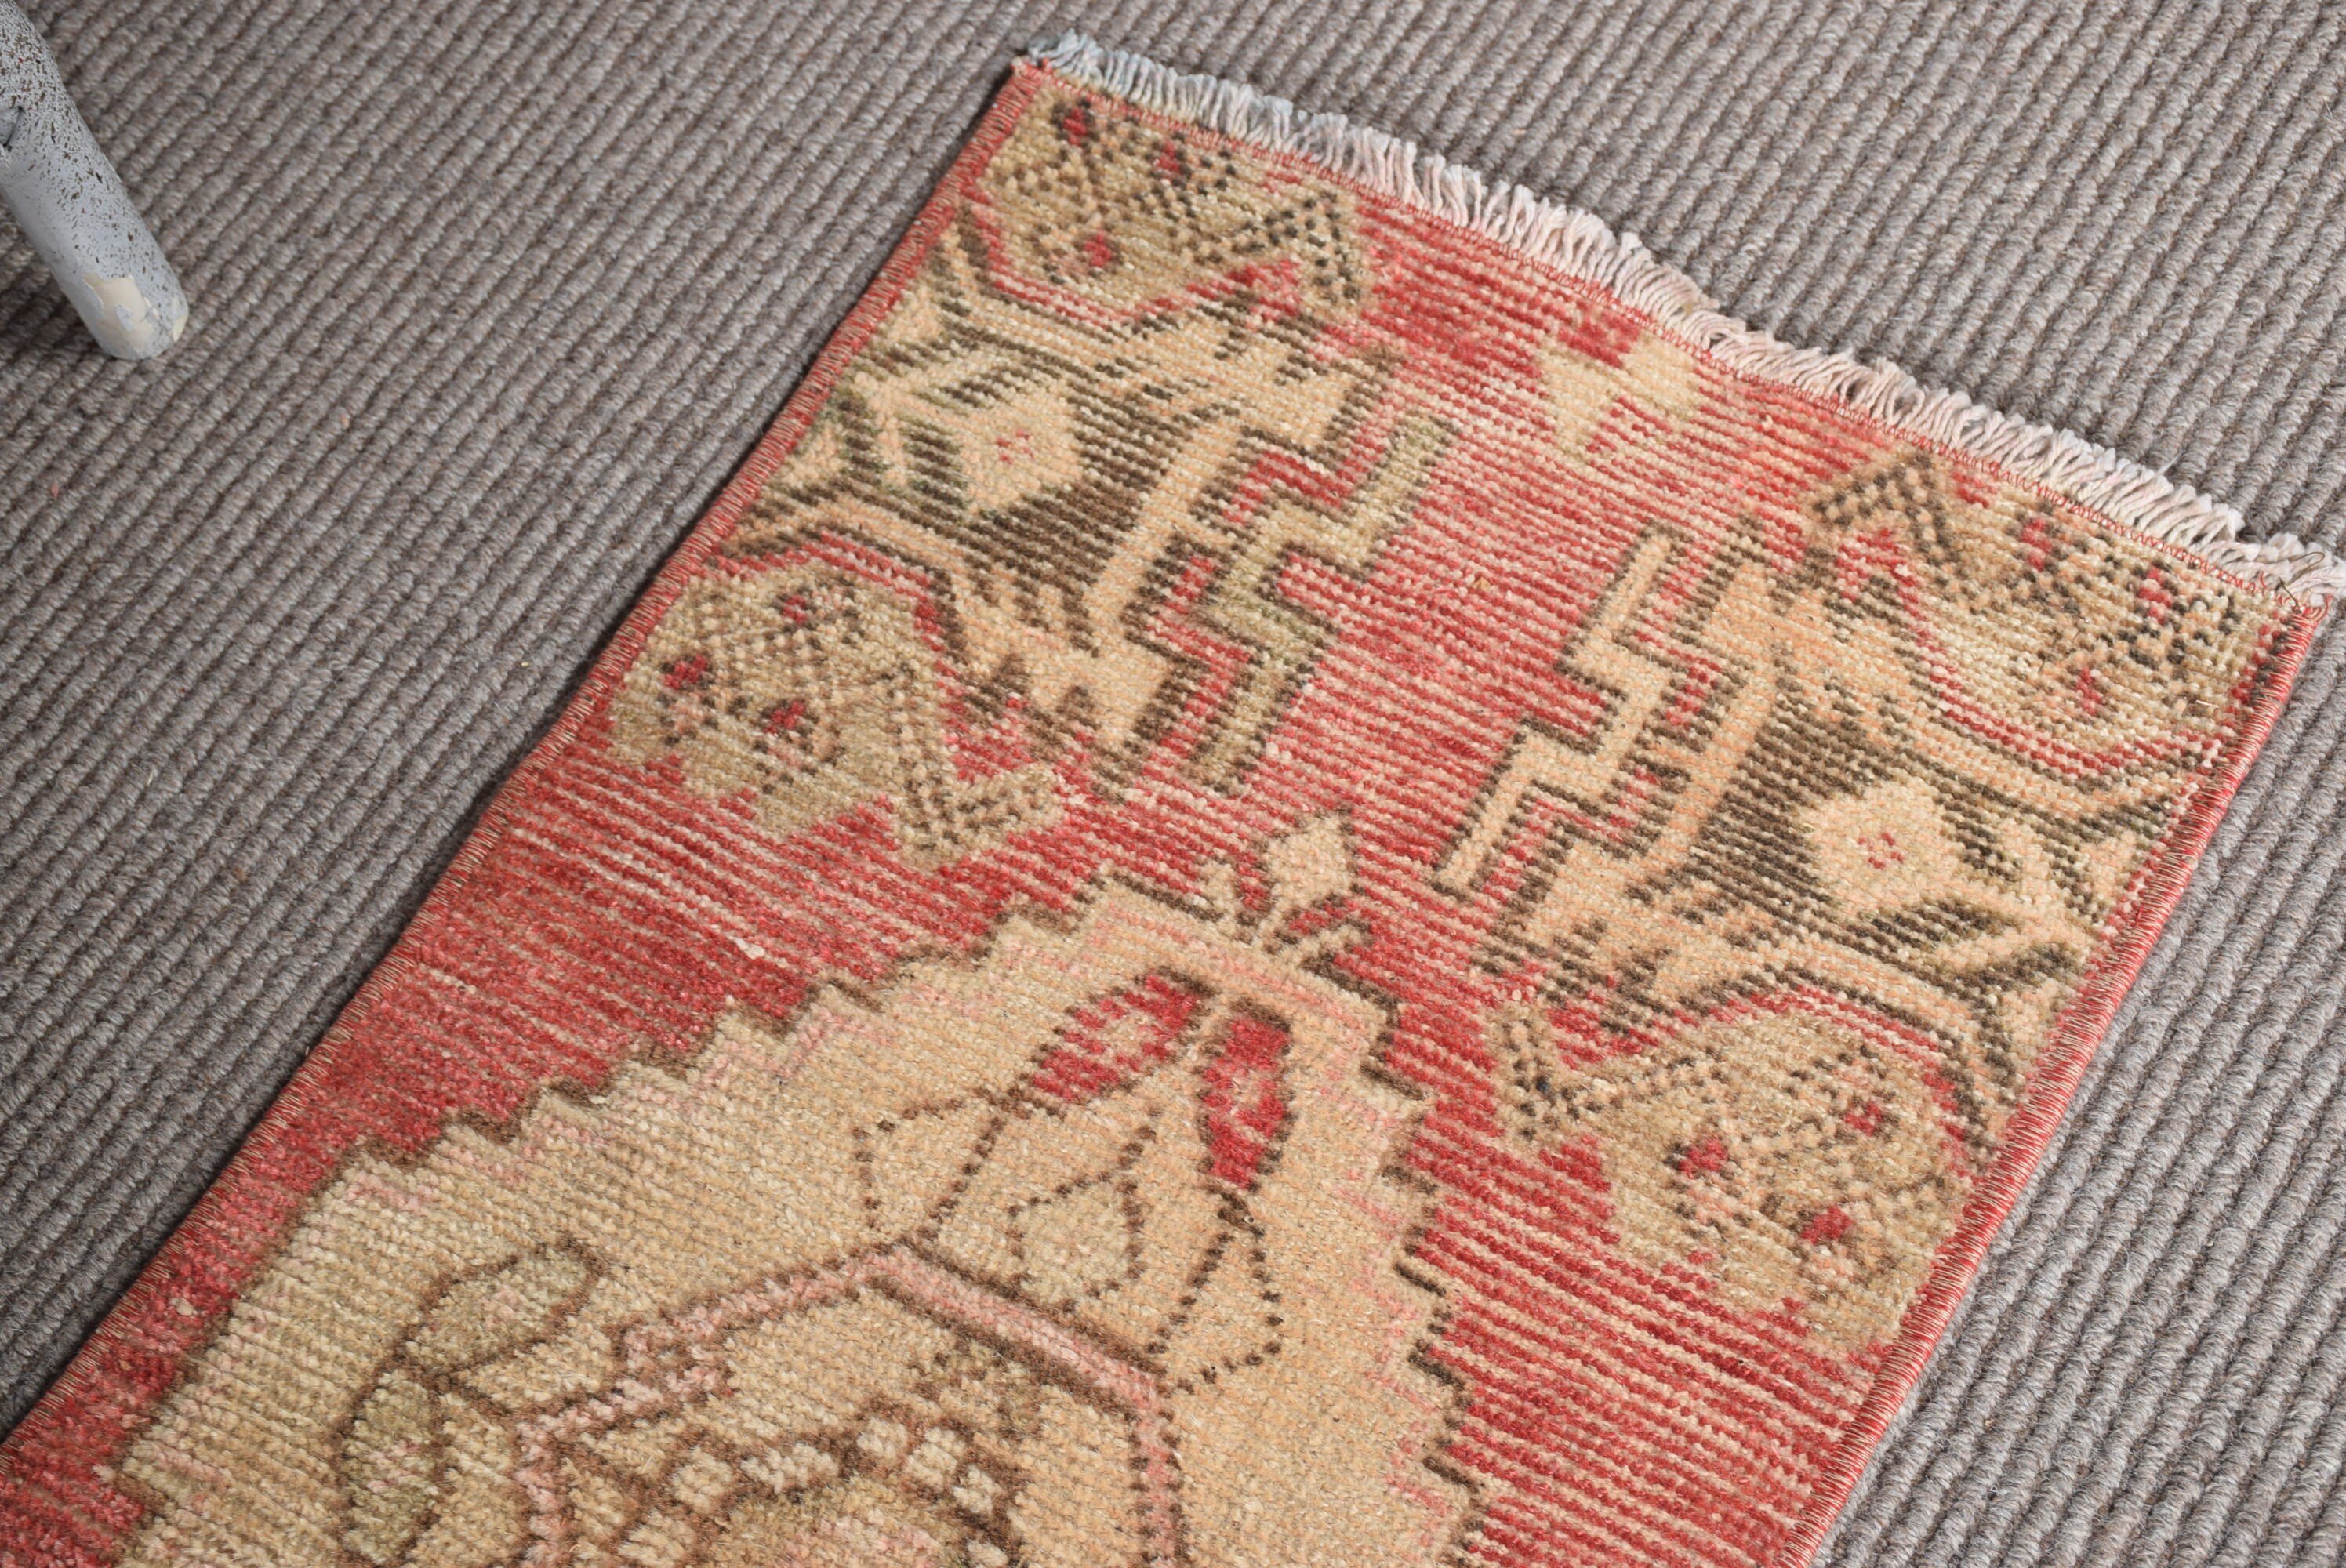 Turkish Rug, Red Cool Rugs, Bedroom Rug, Old Rug, Antique Rugs, Car Mat Rugs, Rugs for Bath, Vintage Rug, 1.6x3.1 ft Small Rug, Oushak Rugs